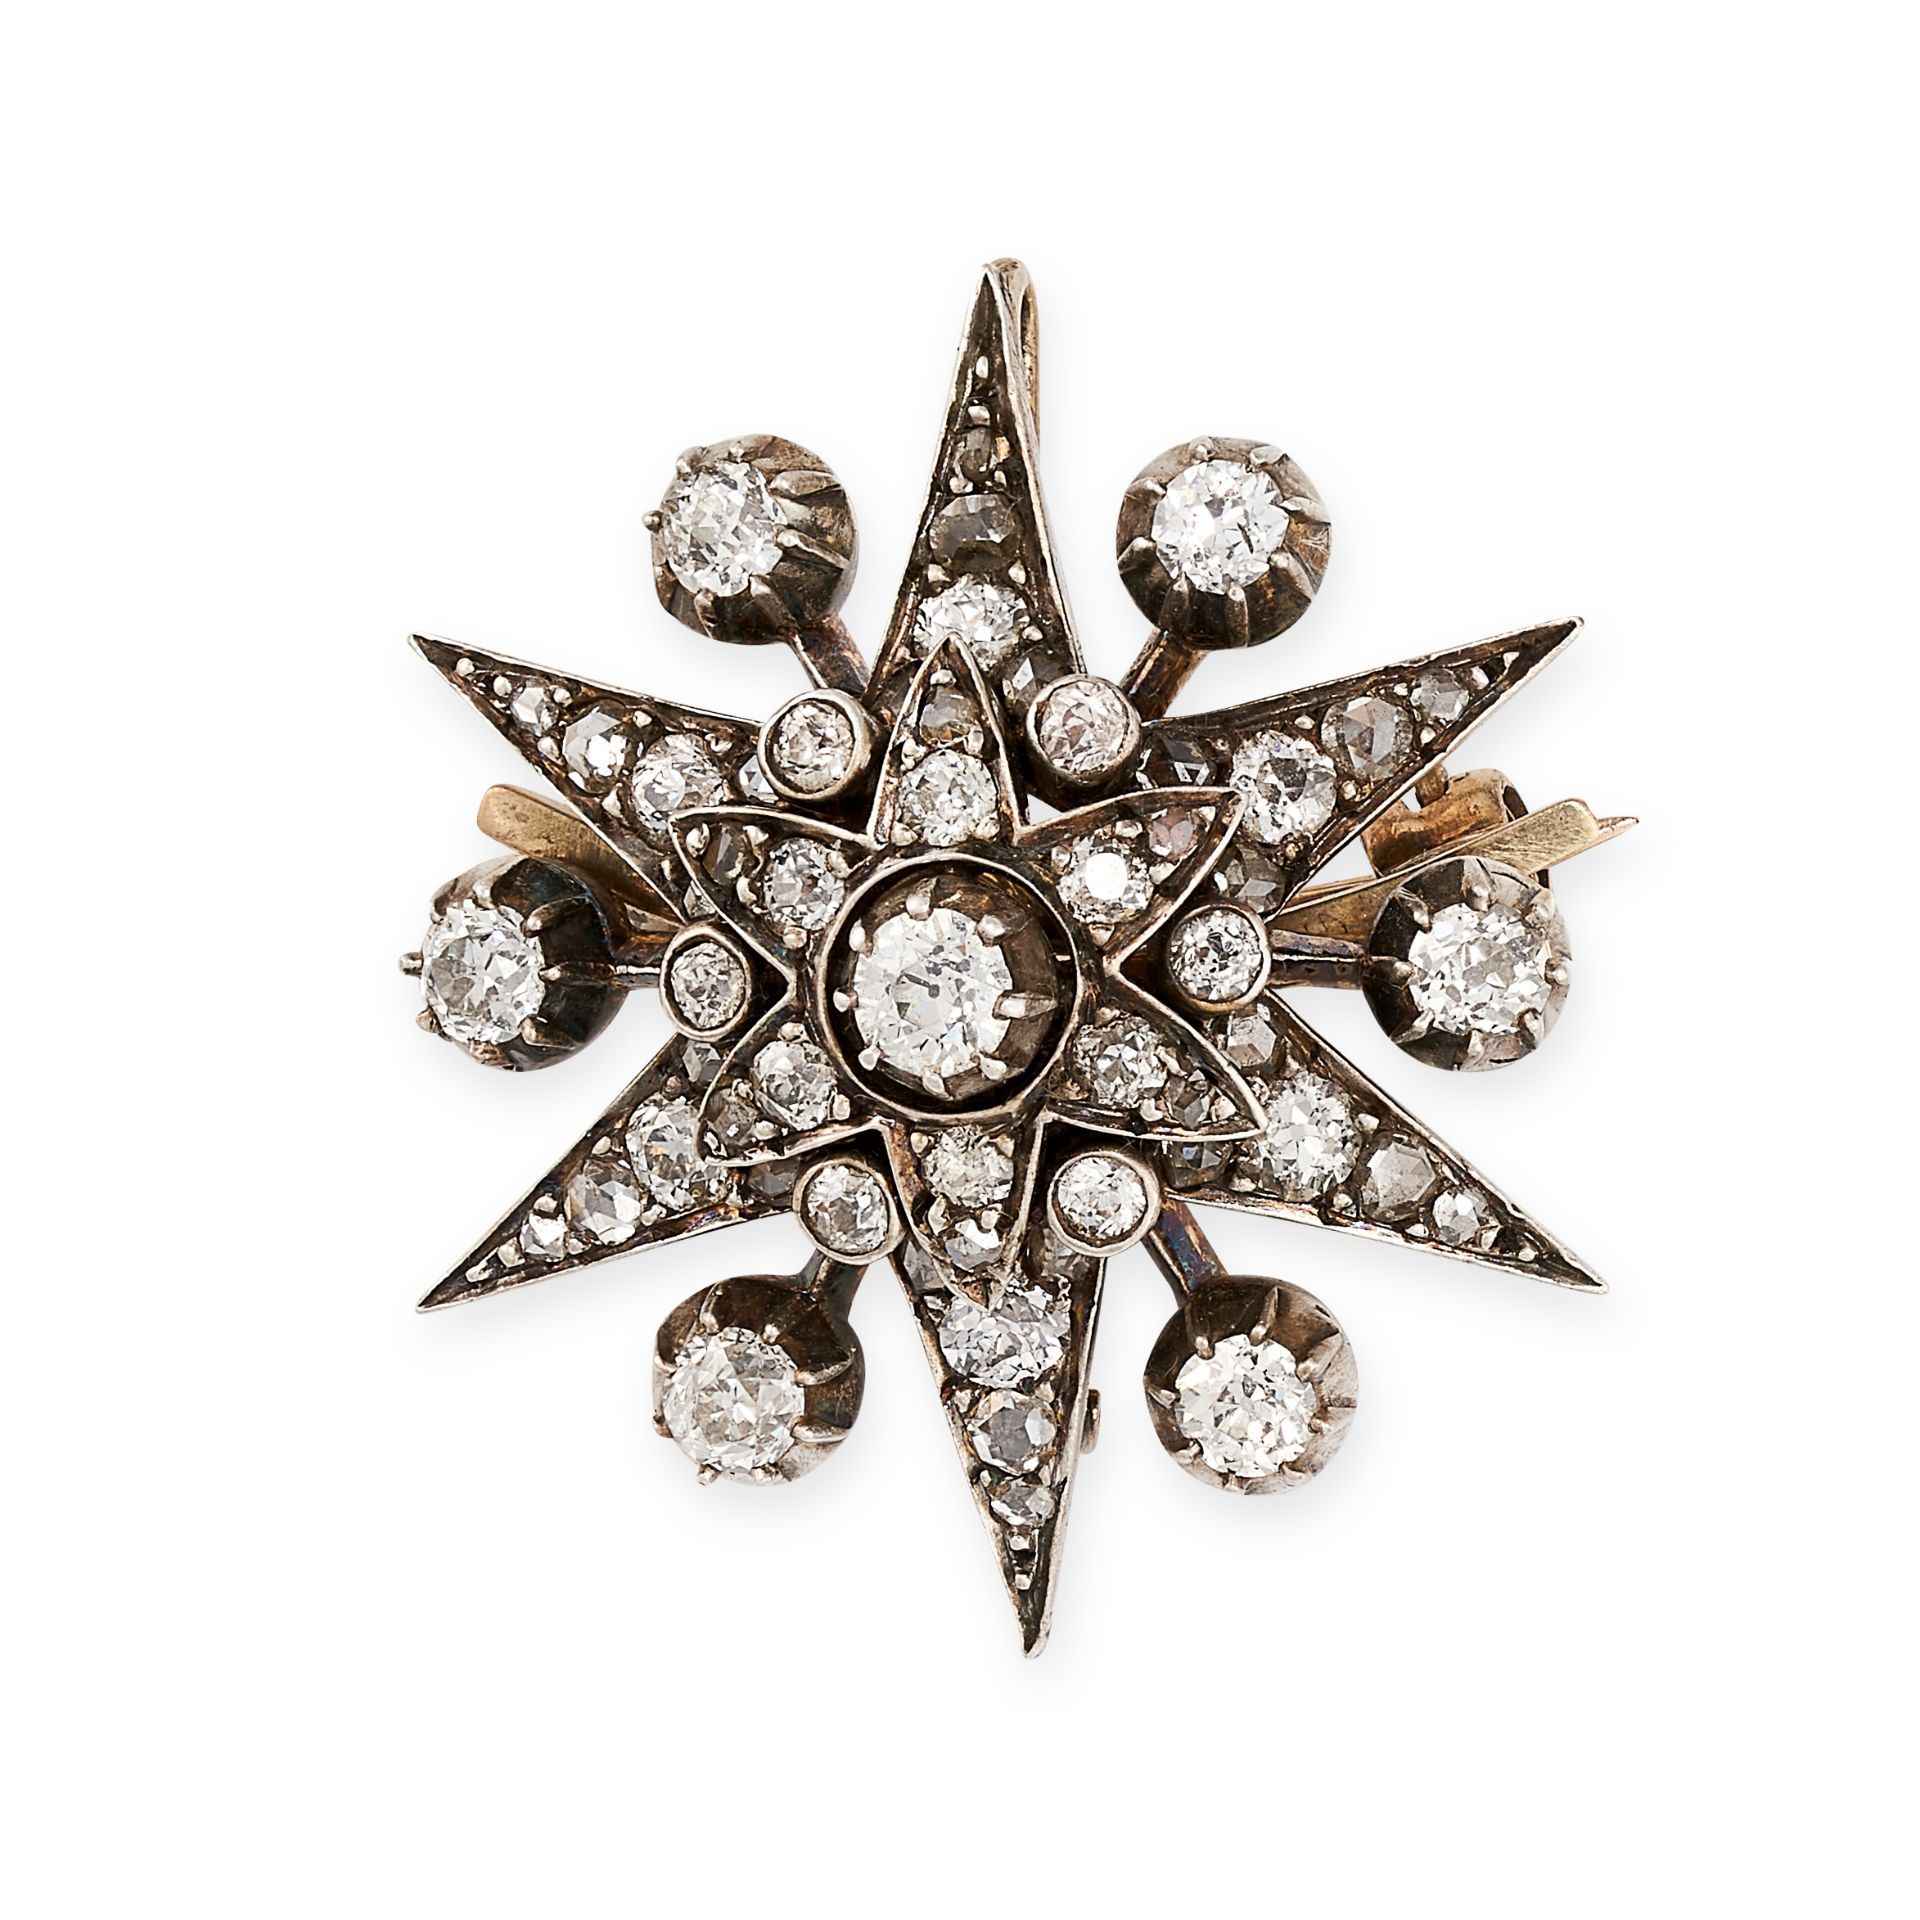 AN ANTIQUE DIAMOND STAR BROOCH / PENDANT, 19TH CENTURY in yellow gold and silver, set with old cut